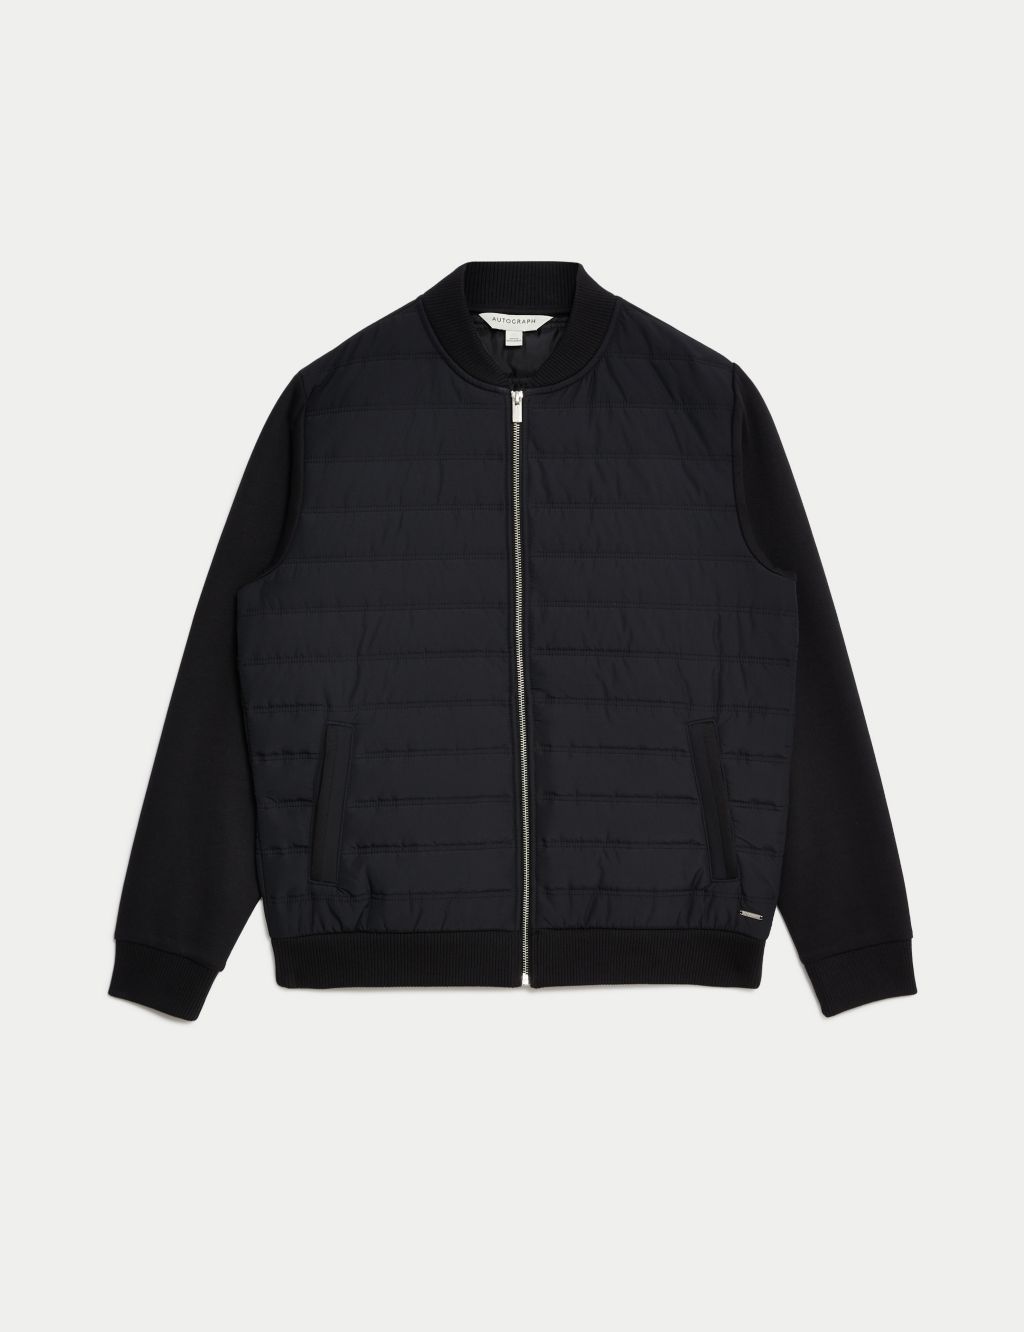 Quilted Bomber Jacket image 1